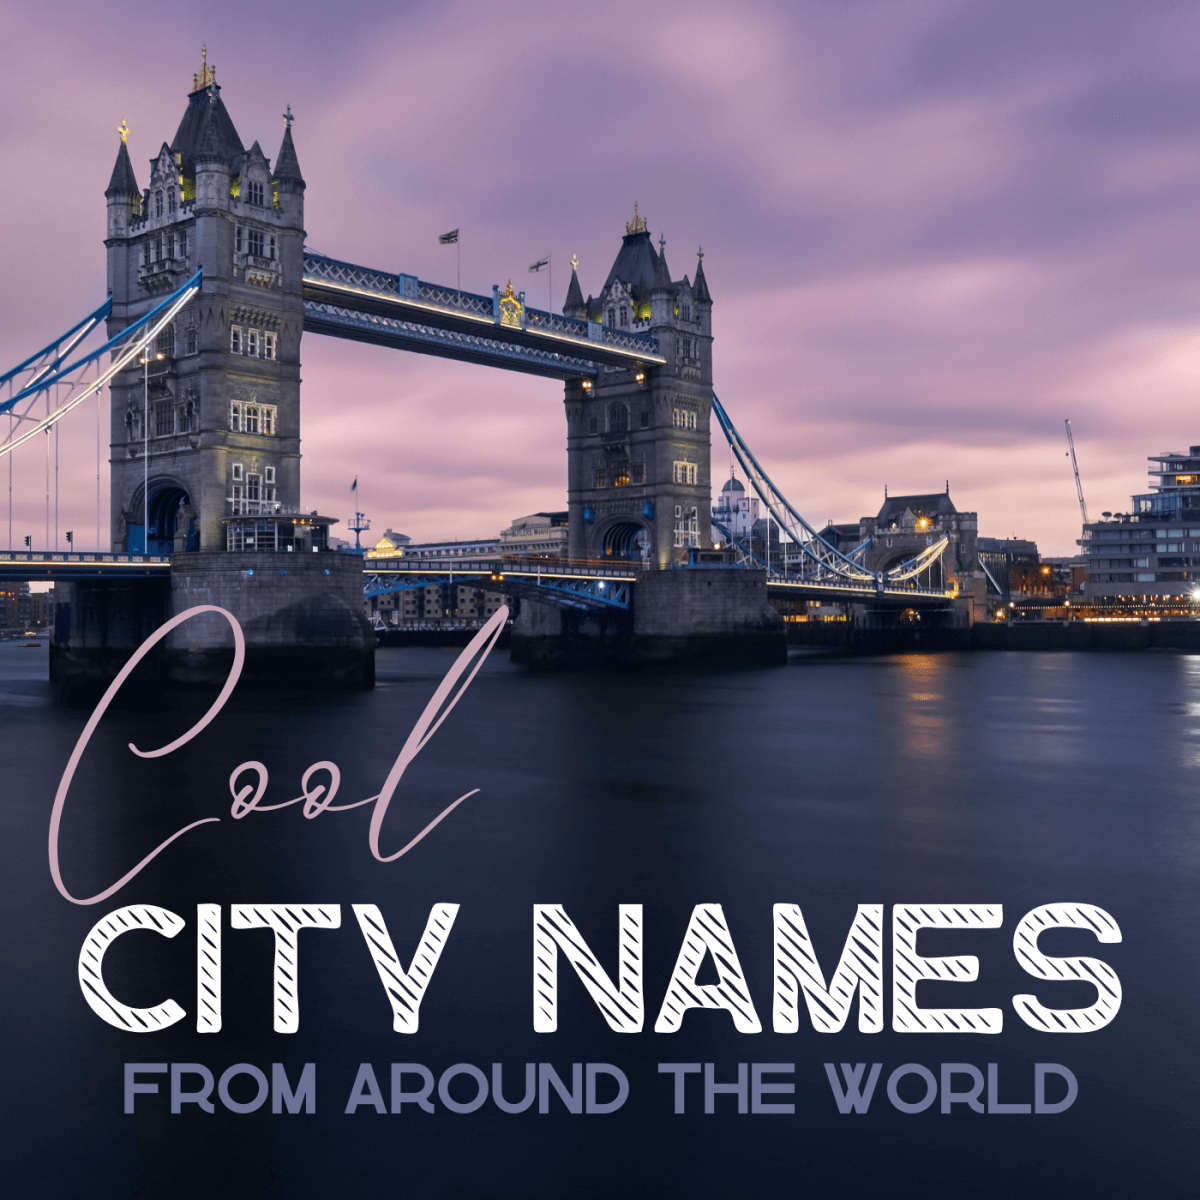 Some of the best city names from around the world are waiting to be discovered.